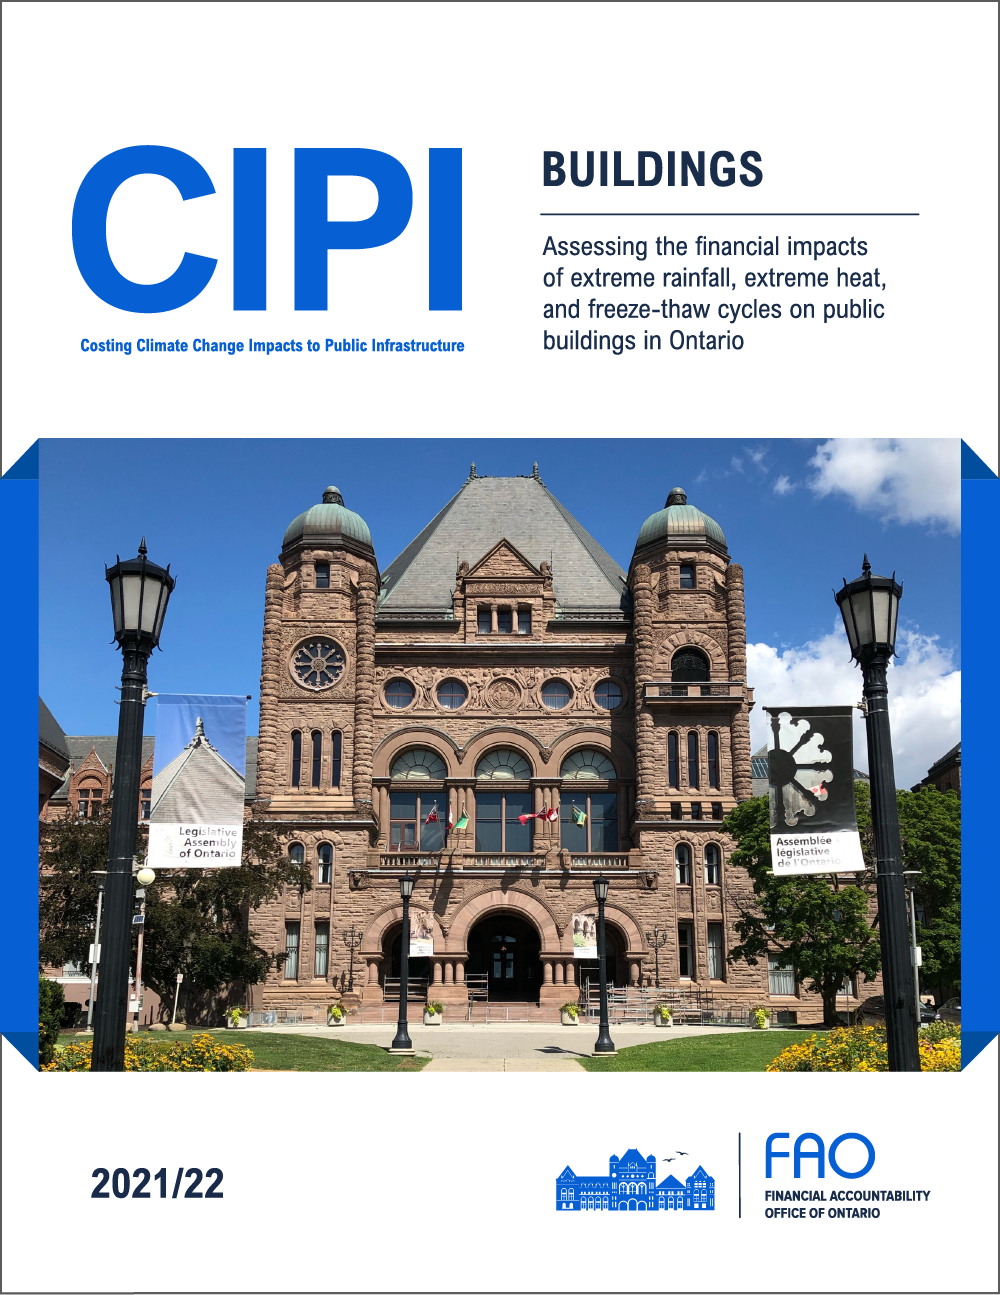 CIPI: Assessing the financial impacts of extreme rainfall, extreme heat and freeze-thaw cycles on public buildings in Ontario